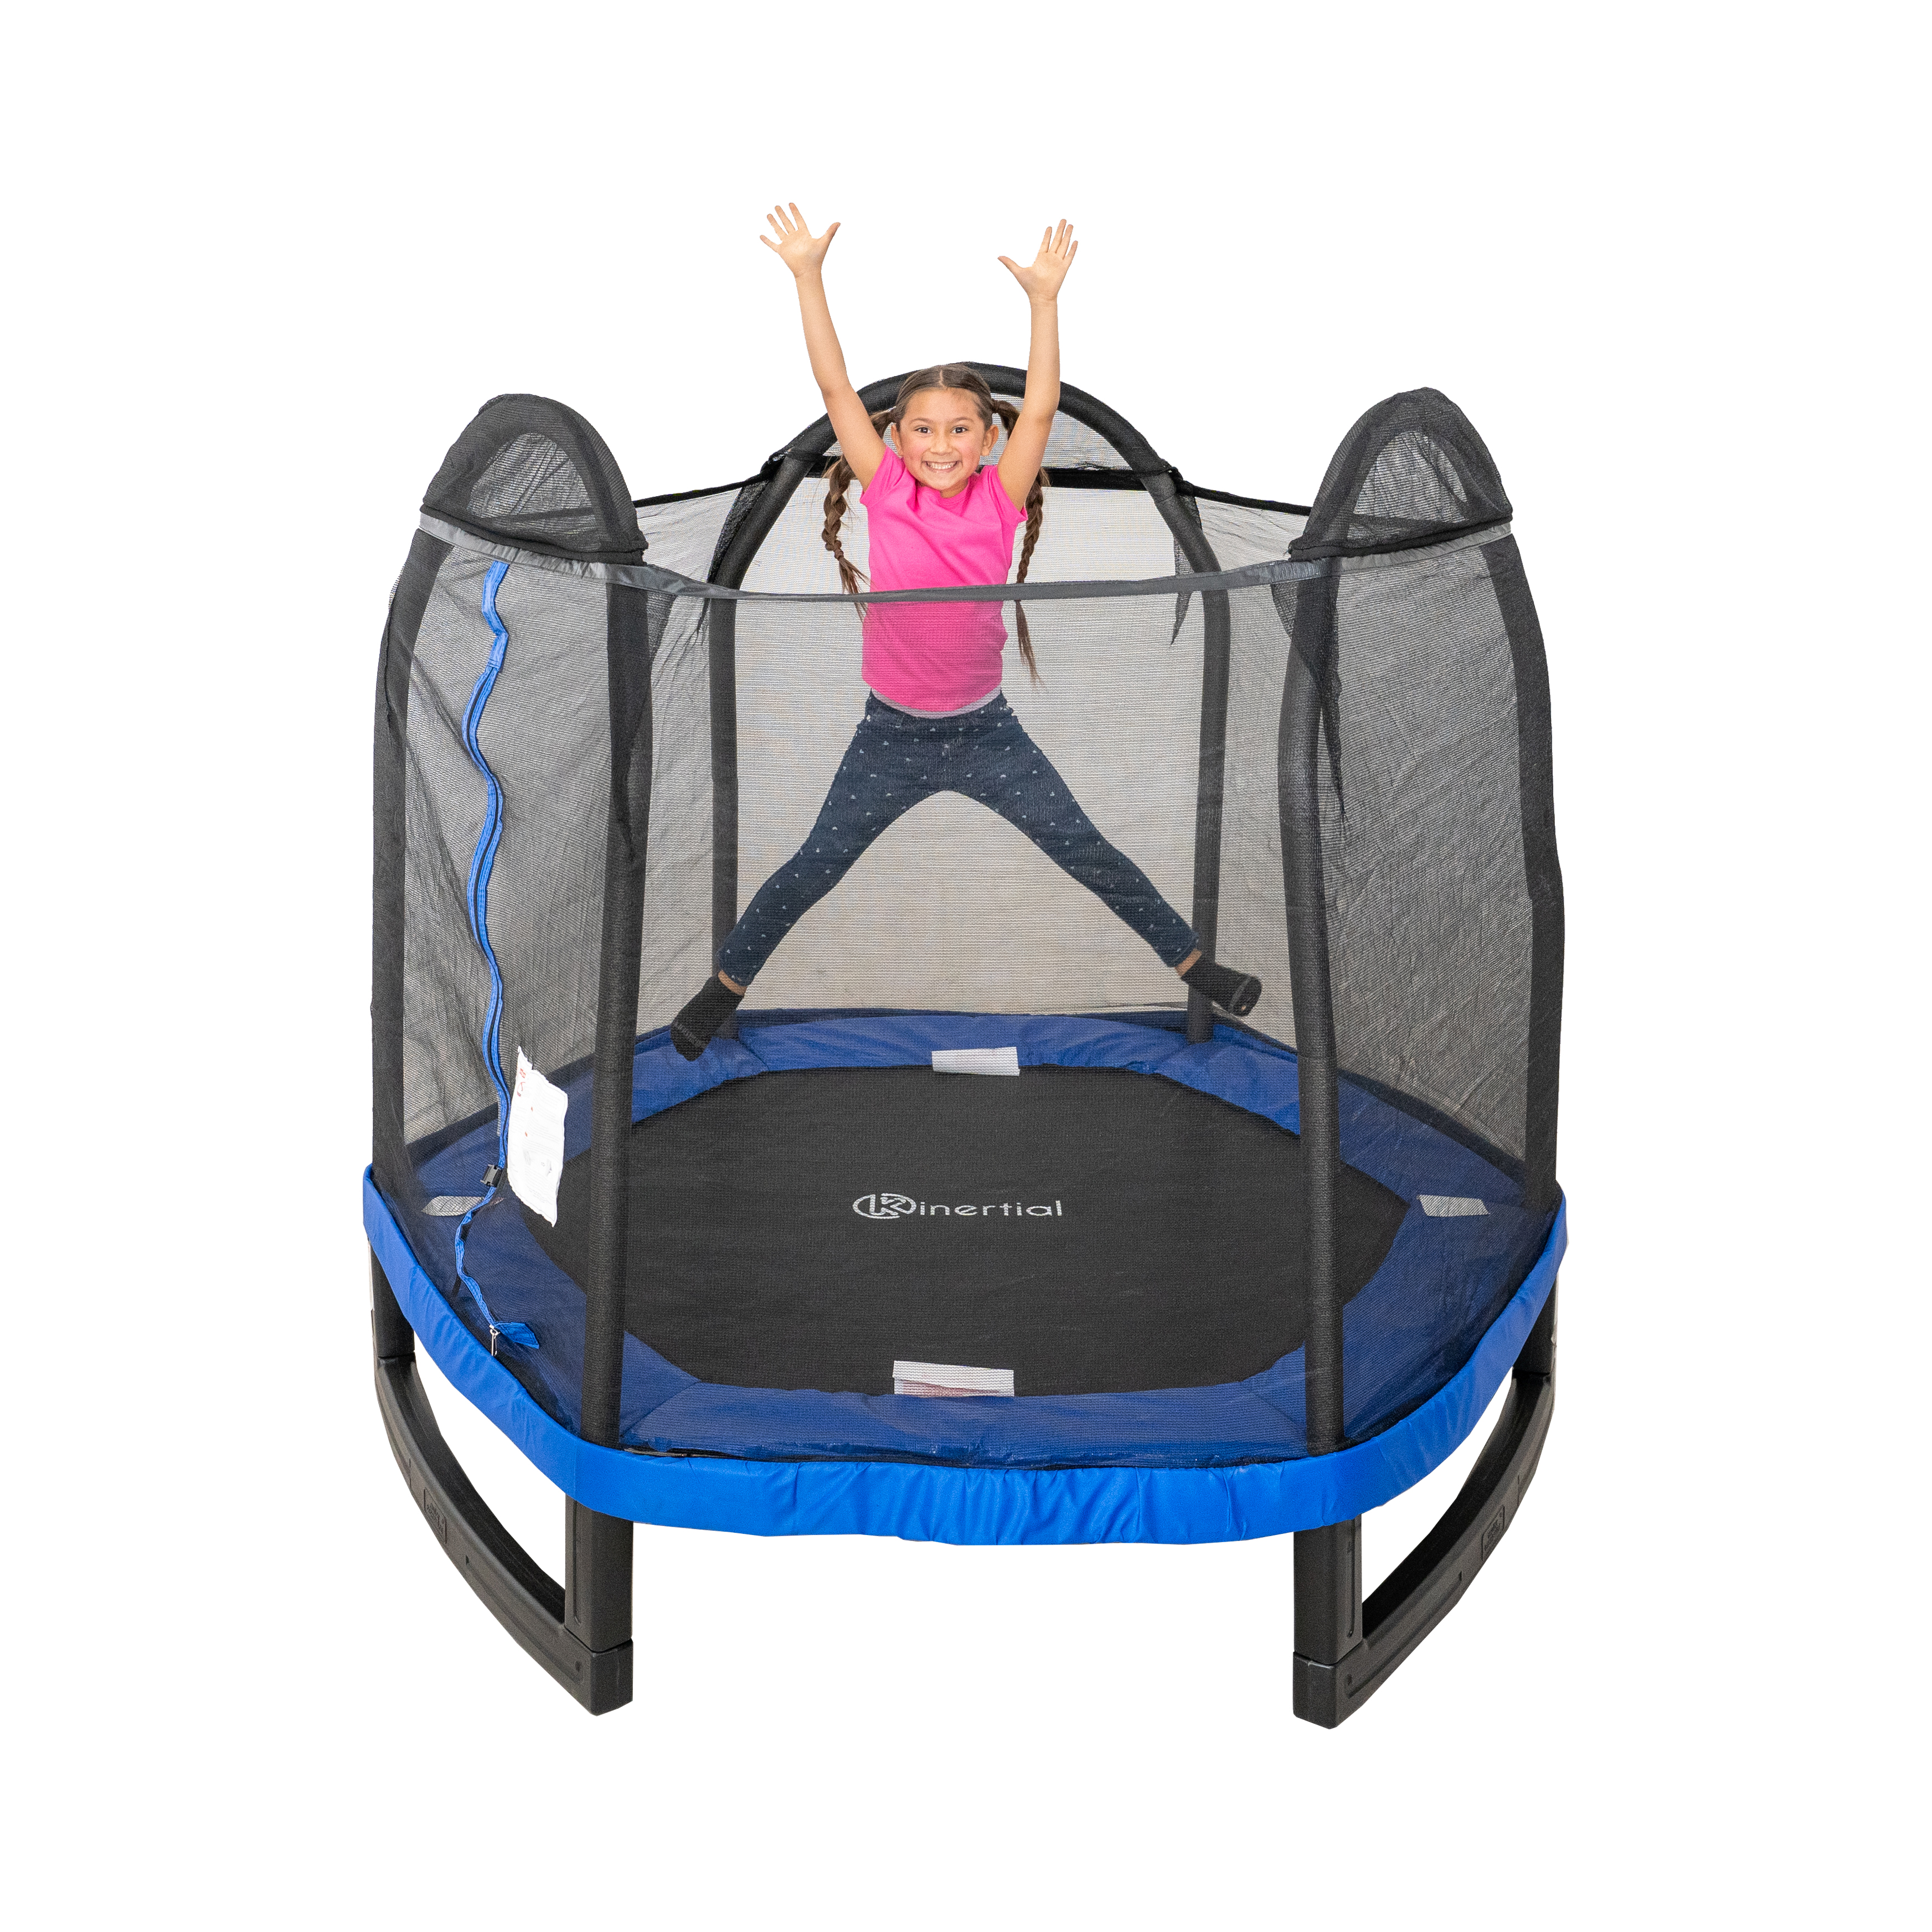 Kinertial 7 ft Hexagonal Kids Trampoline with Safety Enclosure Net (Ages 3 - 10) - image 1 of 9